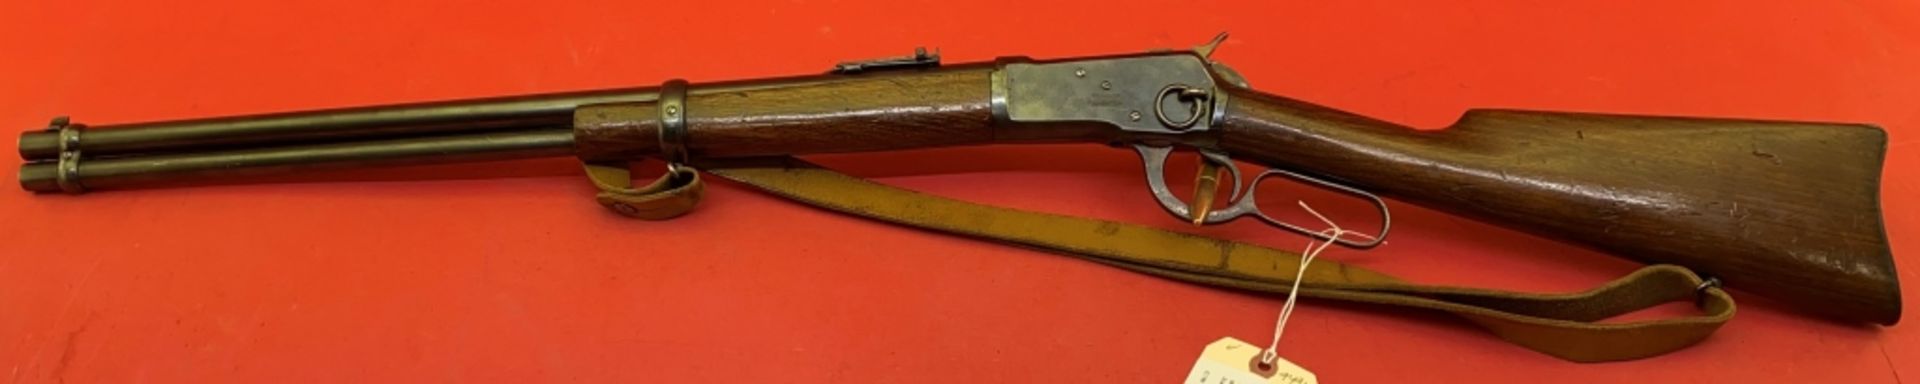 Spain Tigre .44-40 Rifle - Image 14 of 14